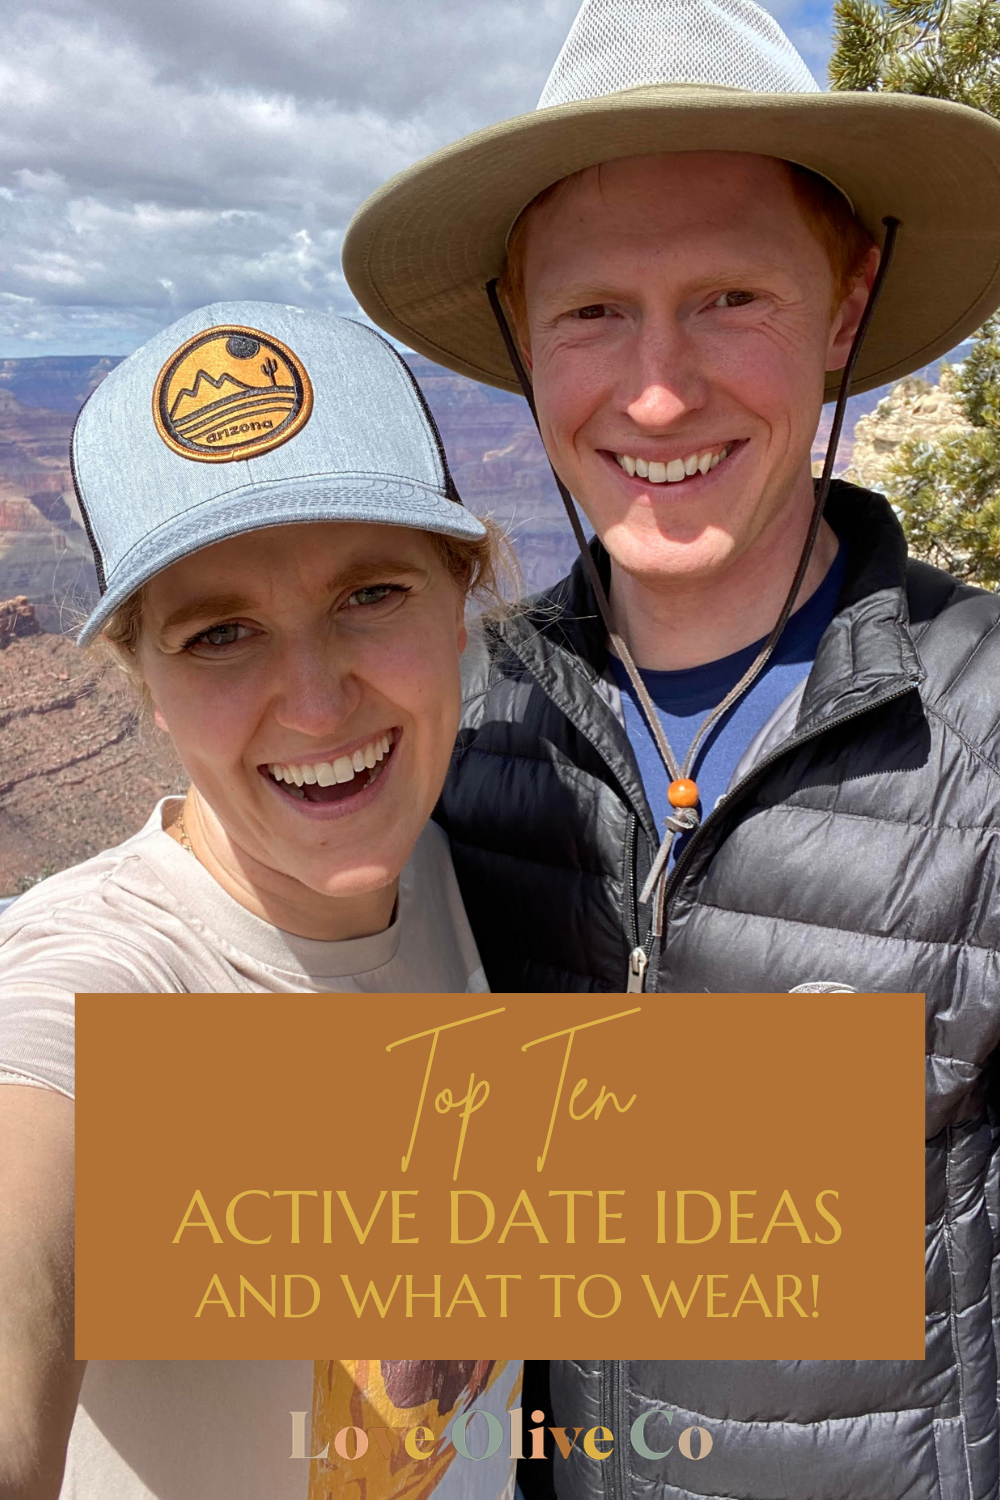 Top 10 Active Date Ideas and what to Wear. www.loveoliveco.com